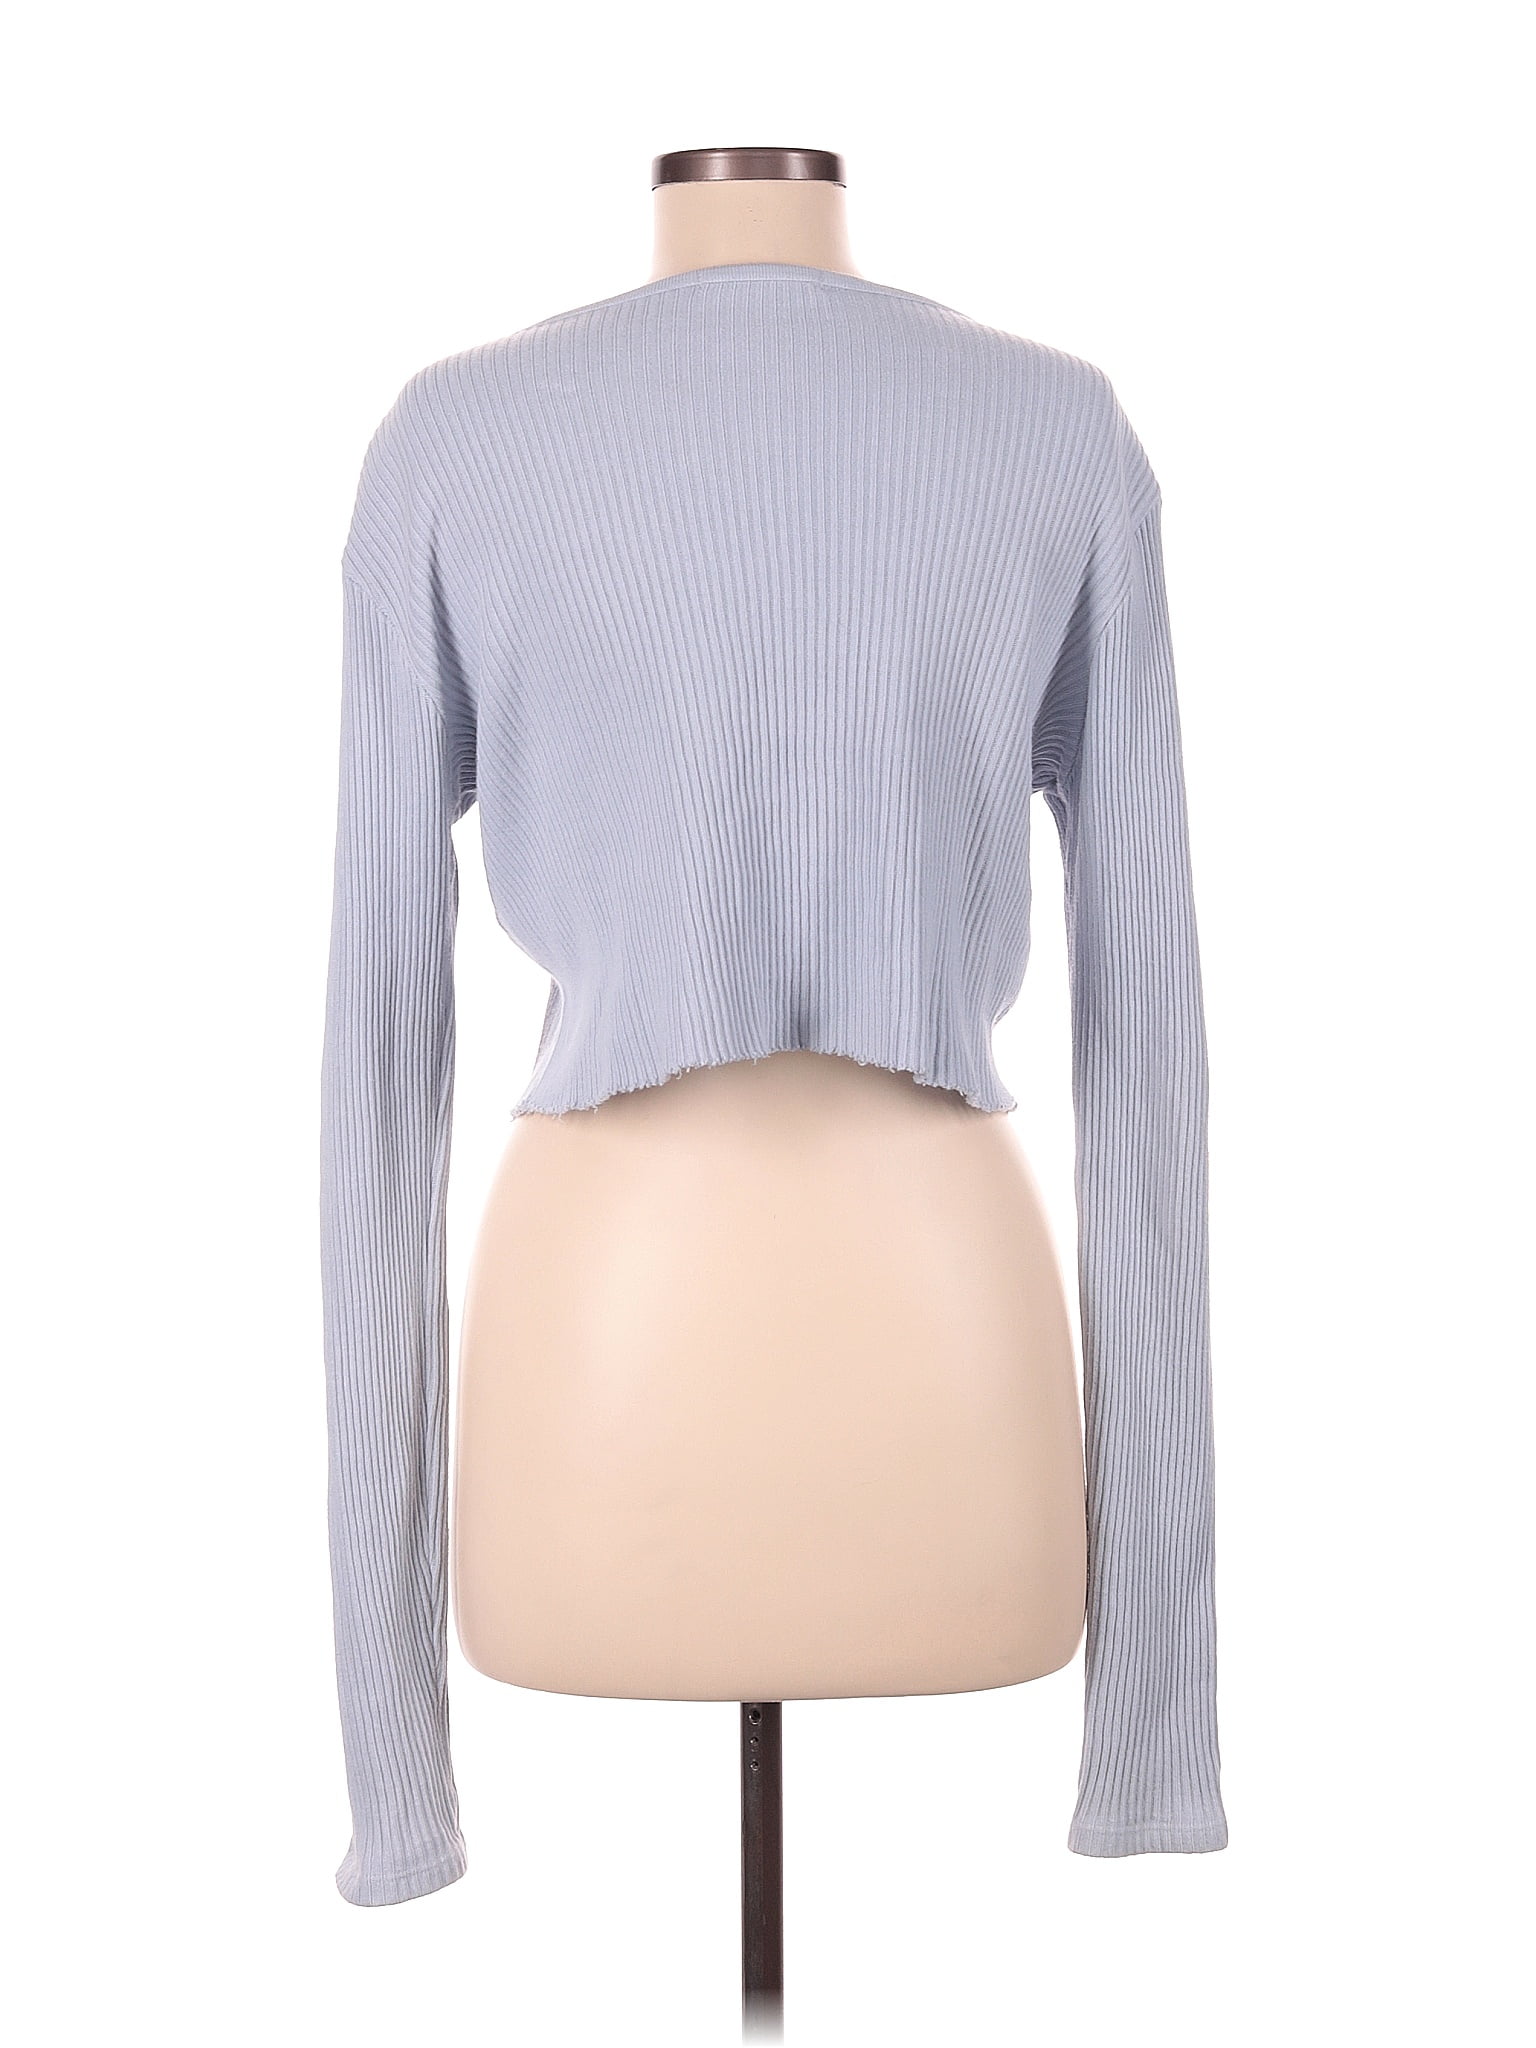 Brandy Melville Brandy Christy Hoodie Blue - $57 New With Tags